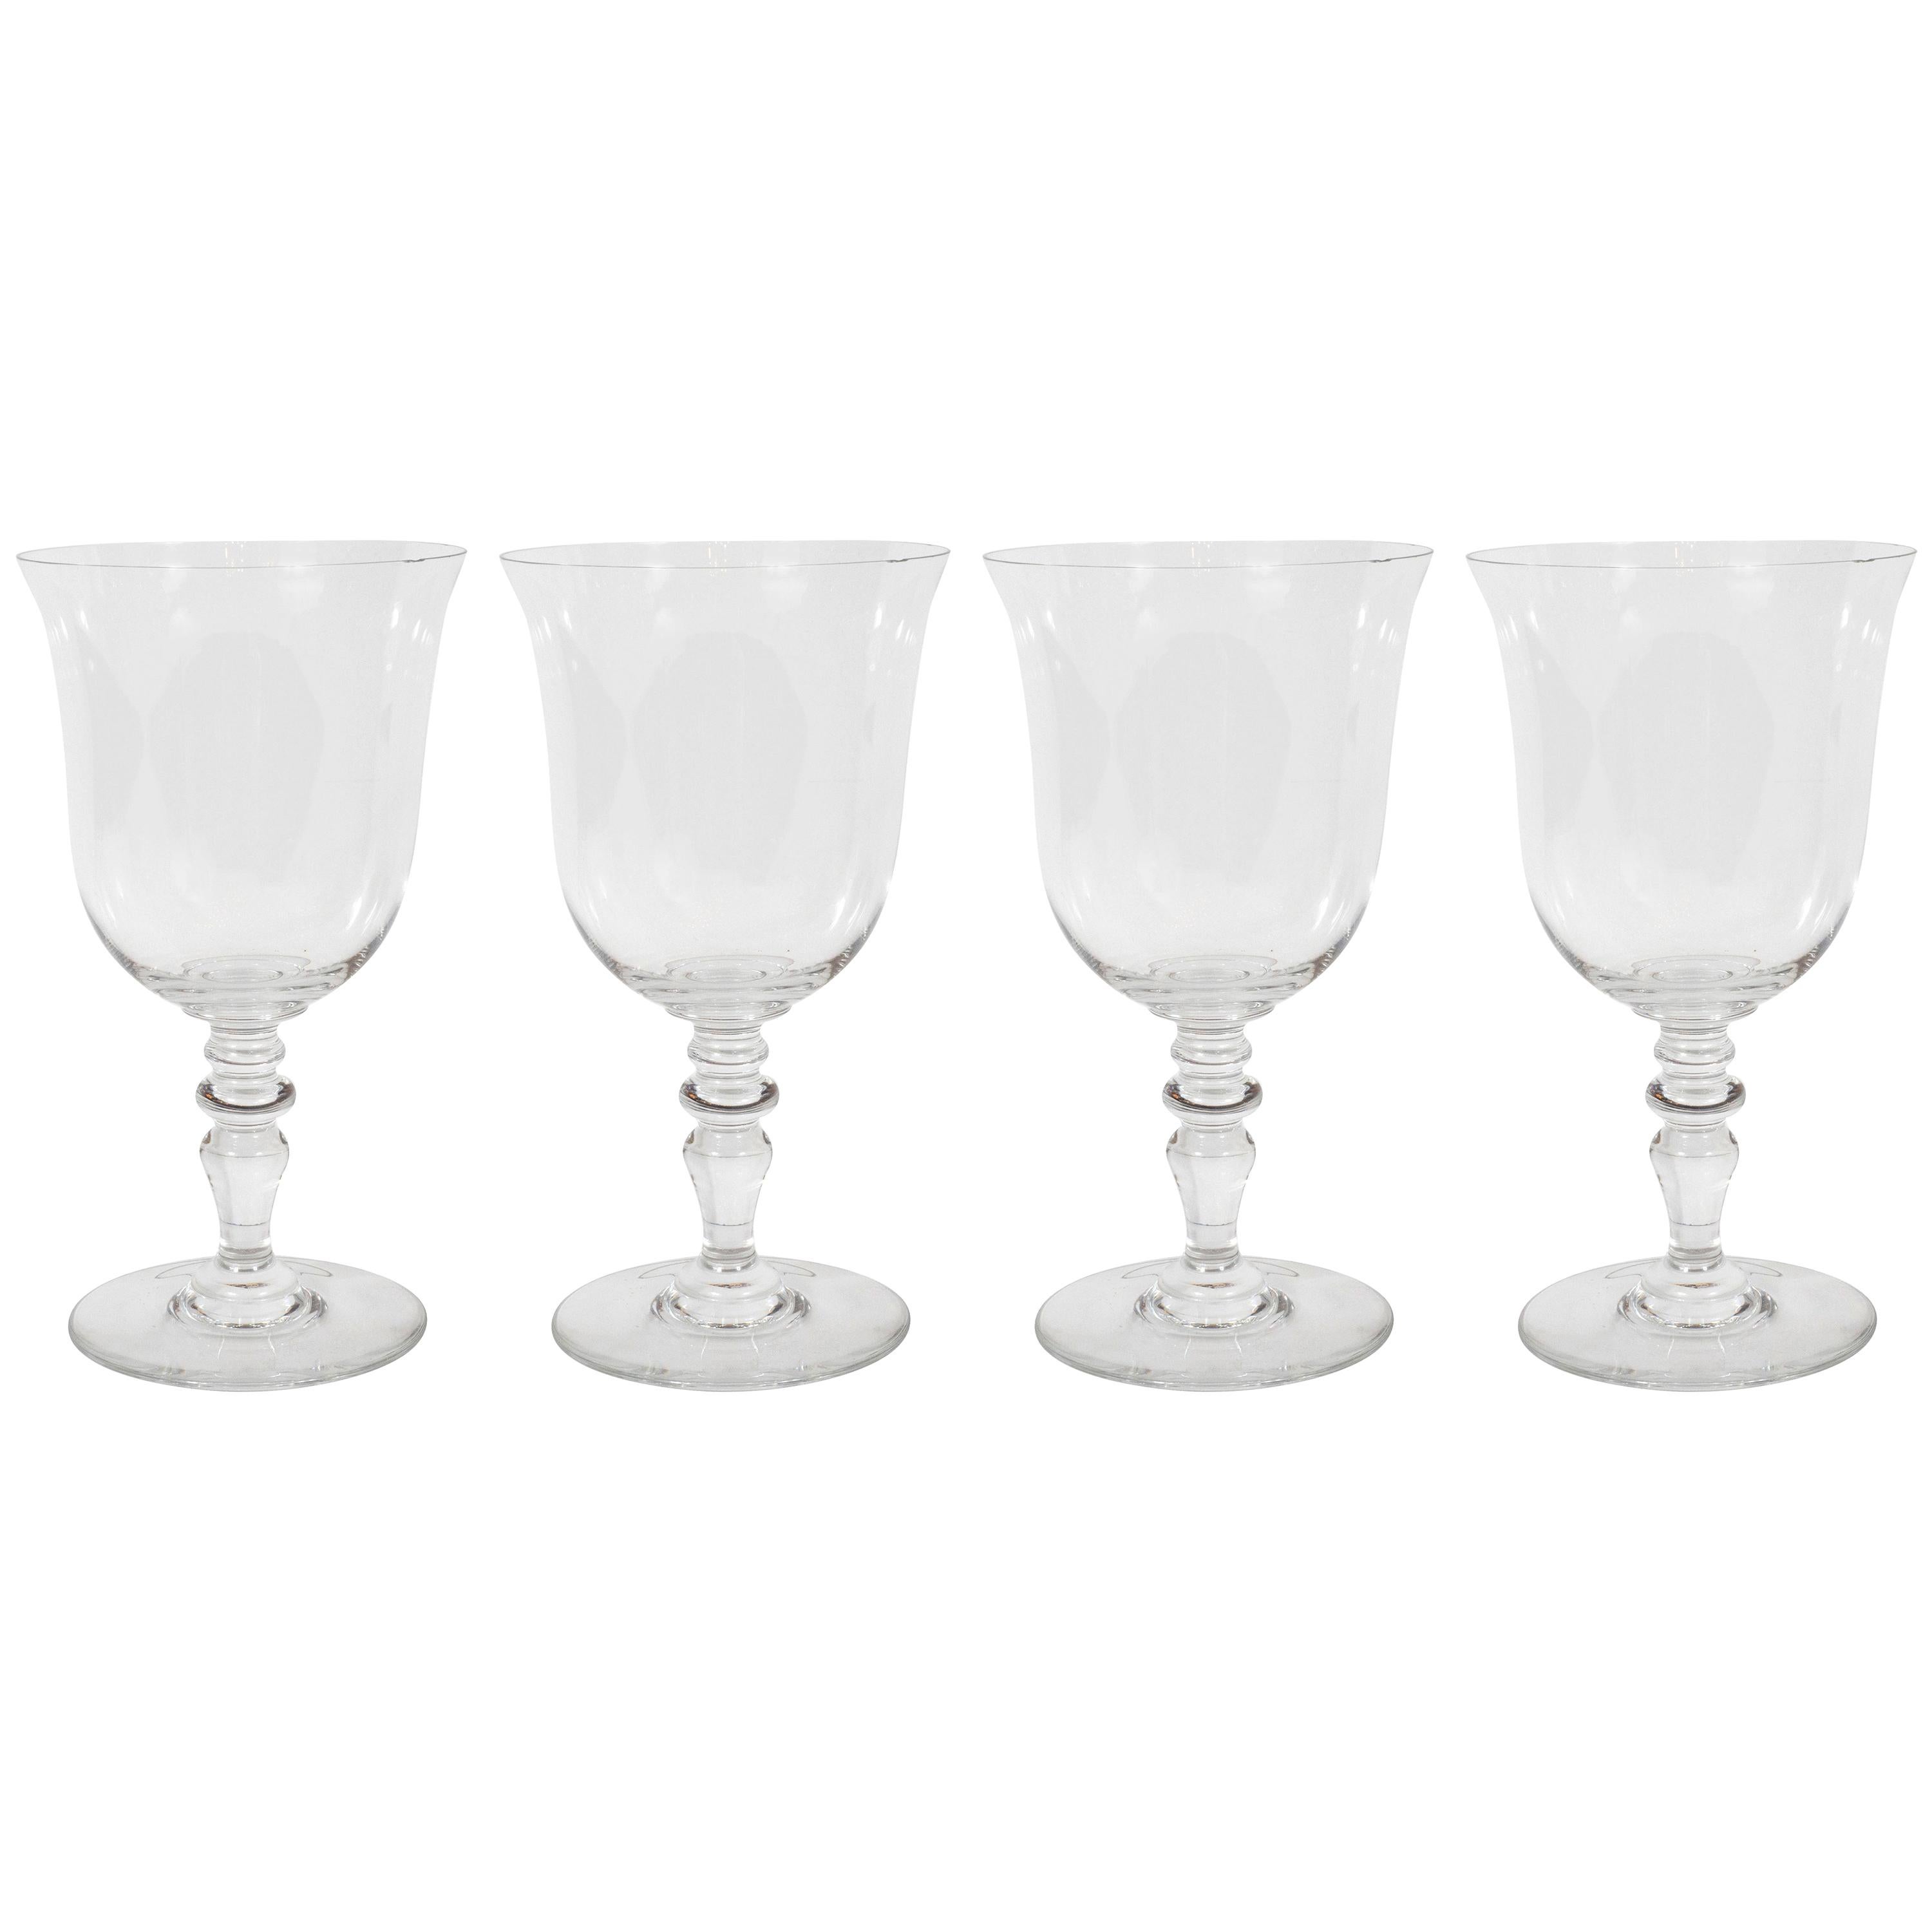 Set of Four Mid-Century Modern Signed Baccarat Crystal Glasses